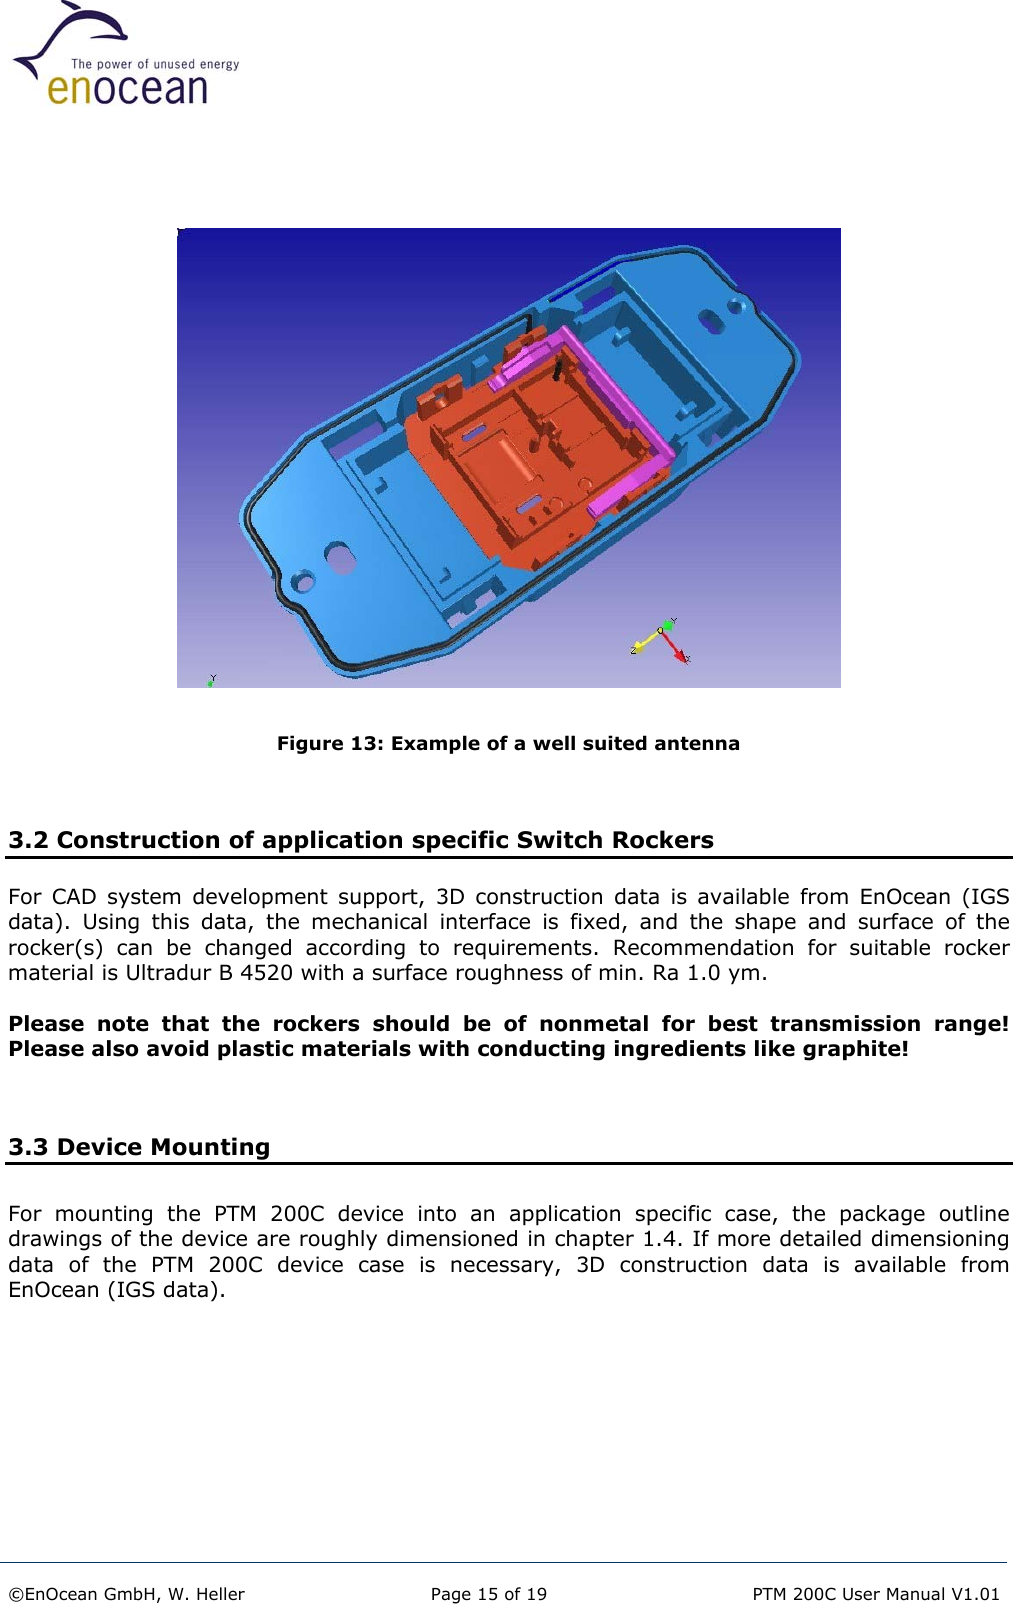      Figure 13: Example of a well suited antenna   3.2 Construction of application specific Switch Rockers For CAD system development support, 3D construction data is available from EnOcean (IGS data). Using this data, the mechanical interface is fixed, and the shape and surface of the rocker(s) can be changed according to requirements. Recommendation for suitable rocker material is Ultradur B 4520 with a surface roughness of min. Ra 1.0 ym.  Please note that the rockers should be of nonmetal for best transmission range! Please also avoid plastic materials with conducting ingredients like graphite!   3.3 Device Mounting For mounting the PTM 200C device into an application specific case, the package outline drawings of the device are roughly dimensioned in chapter 1.4. If more detailed dimensioning data of the PTM 200C device case is necessary, 3D construction data is available from EnOcean (IGS data).     ©EnOcean GmbH, W. Heller  Page 15 of 19   PTM 200C User Manual V1.01  